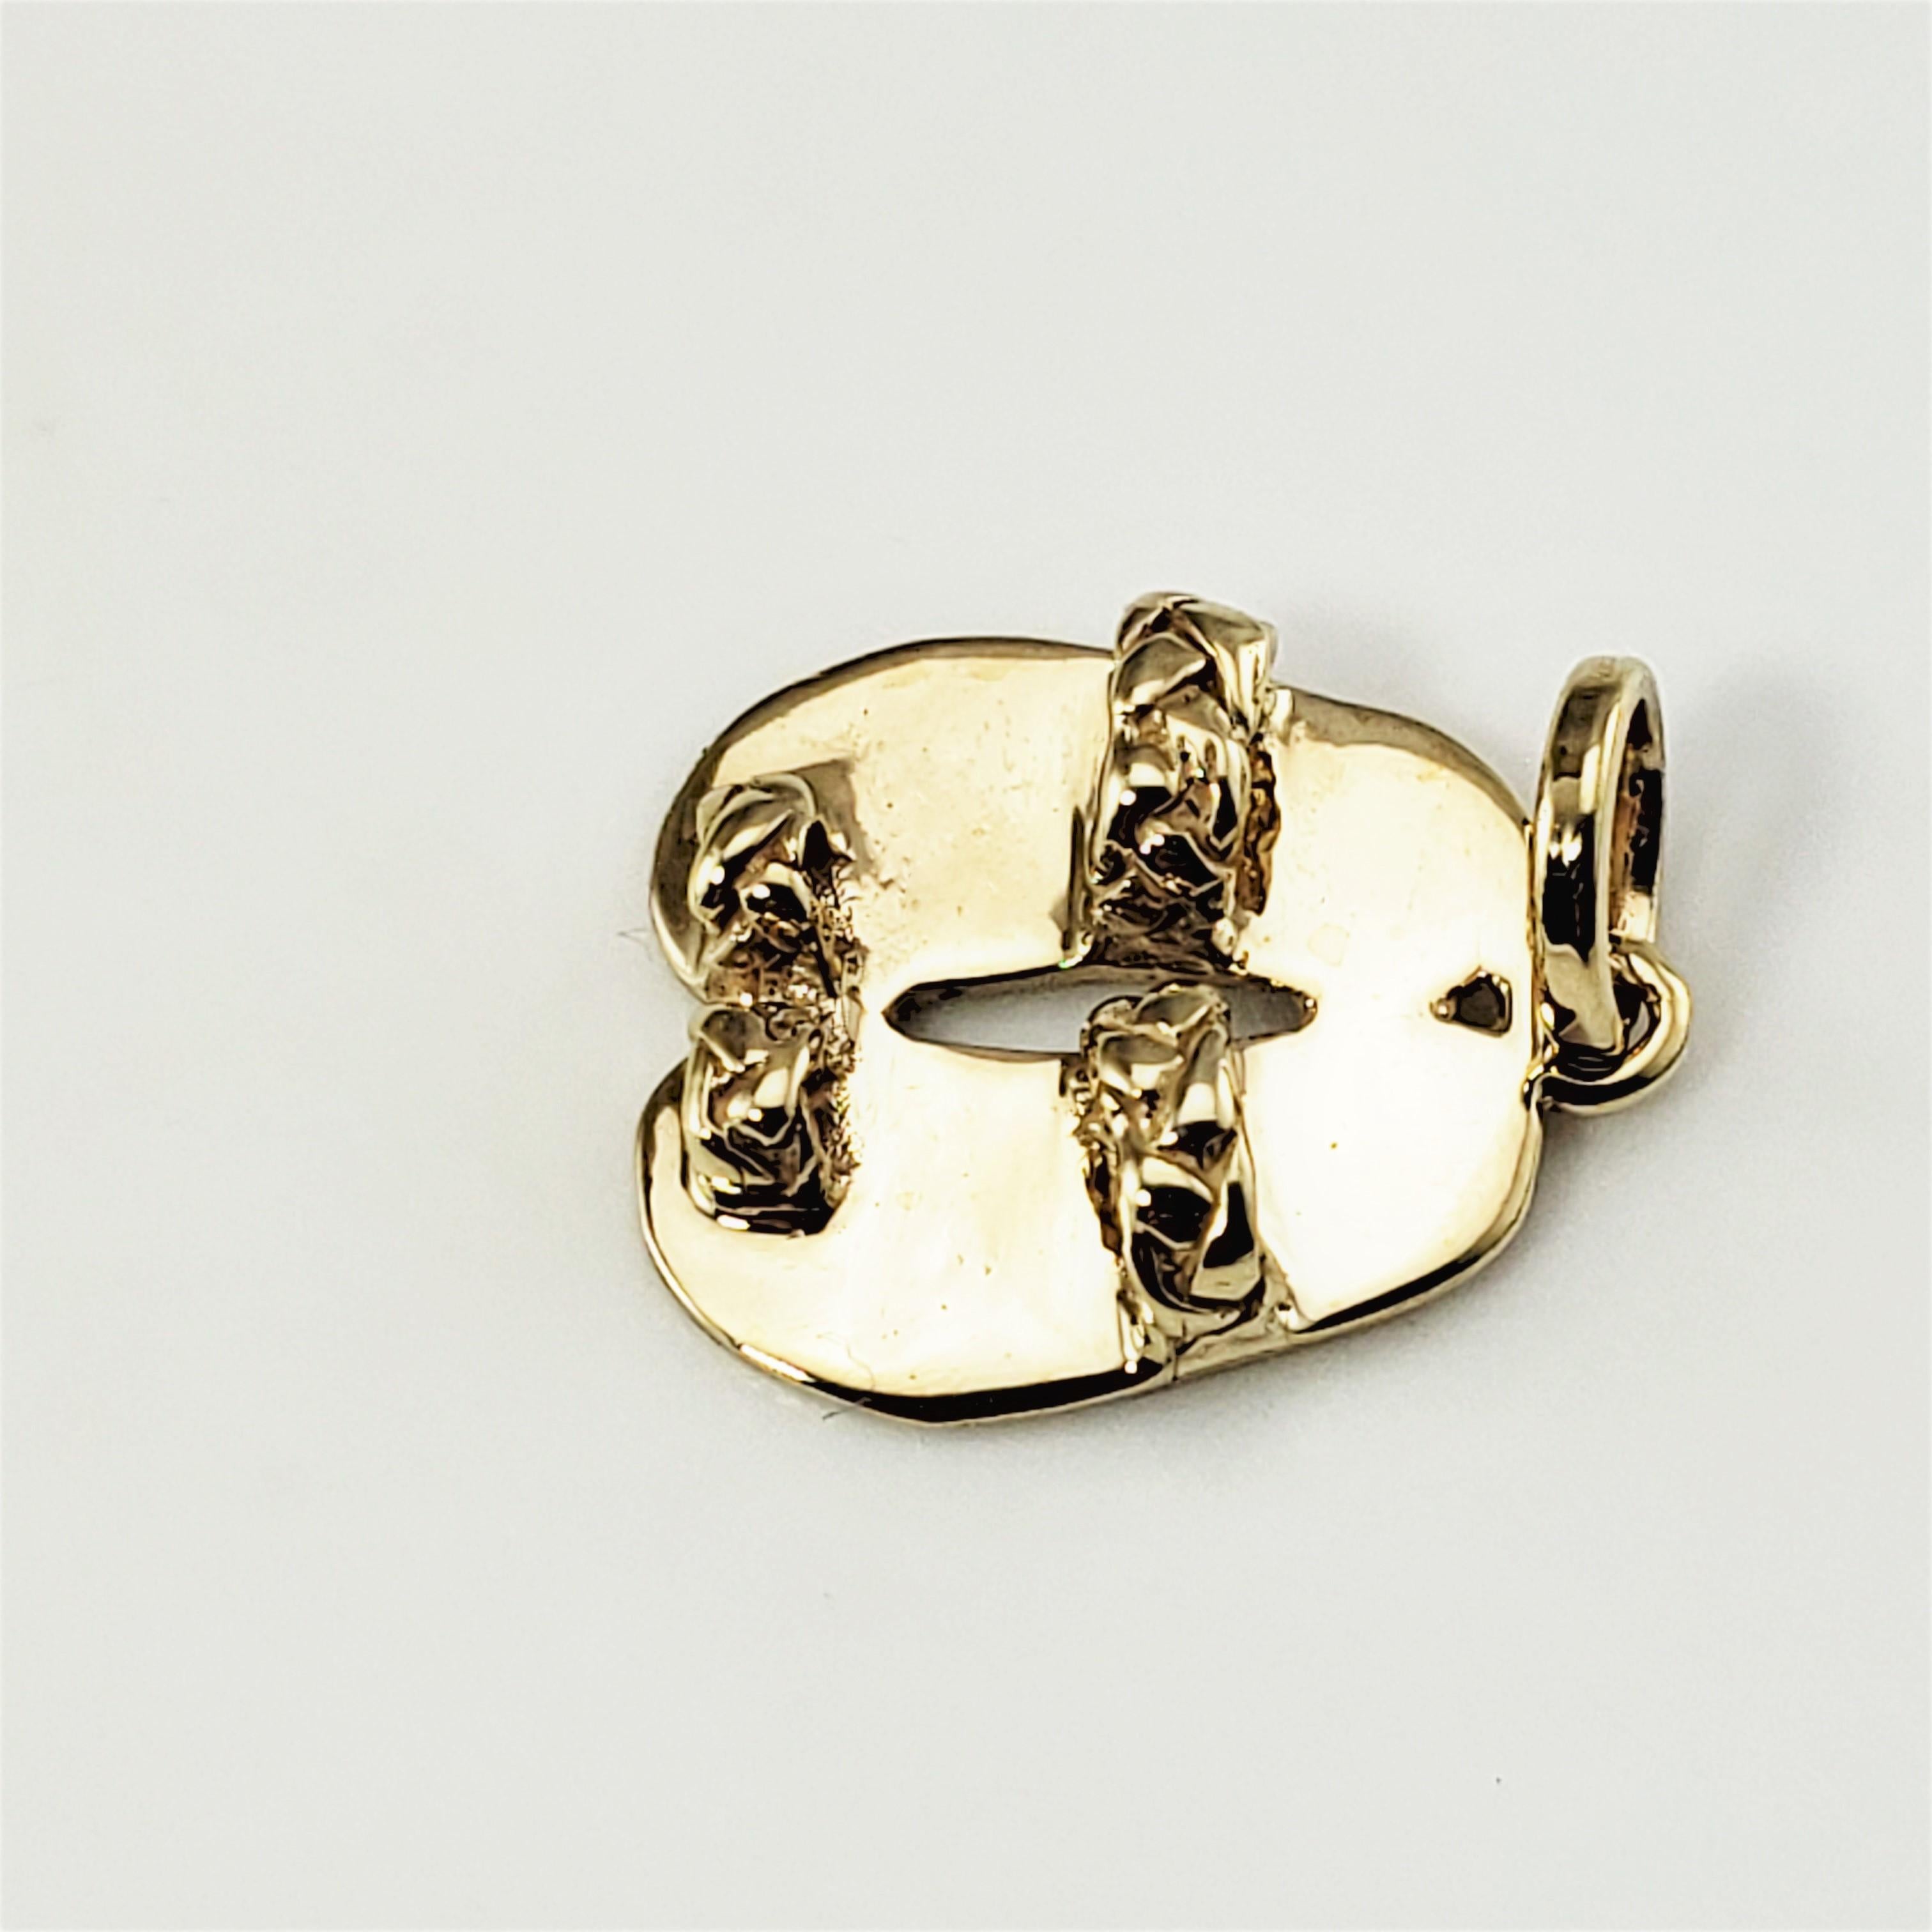 10 Karat Yellow Gold Flip Flops Charm-

Everyone loves flip flop weather!

This fun 3D charm features a pair of flip flops meticulously detailed in 10K yellow gold.

*Chain not included.

Size: 17 mm x 14 mm (actual charm)

Weight:  1.2 dwt. /  1.9